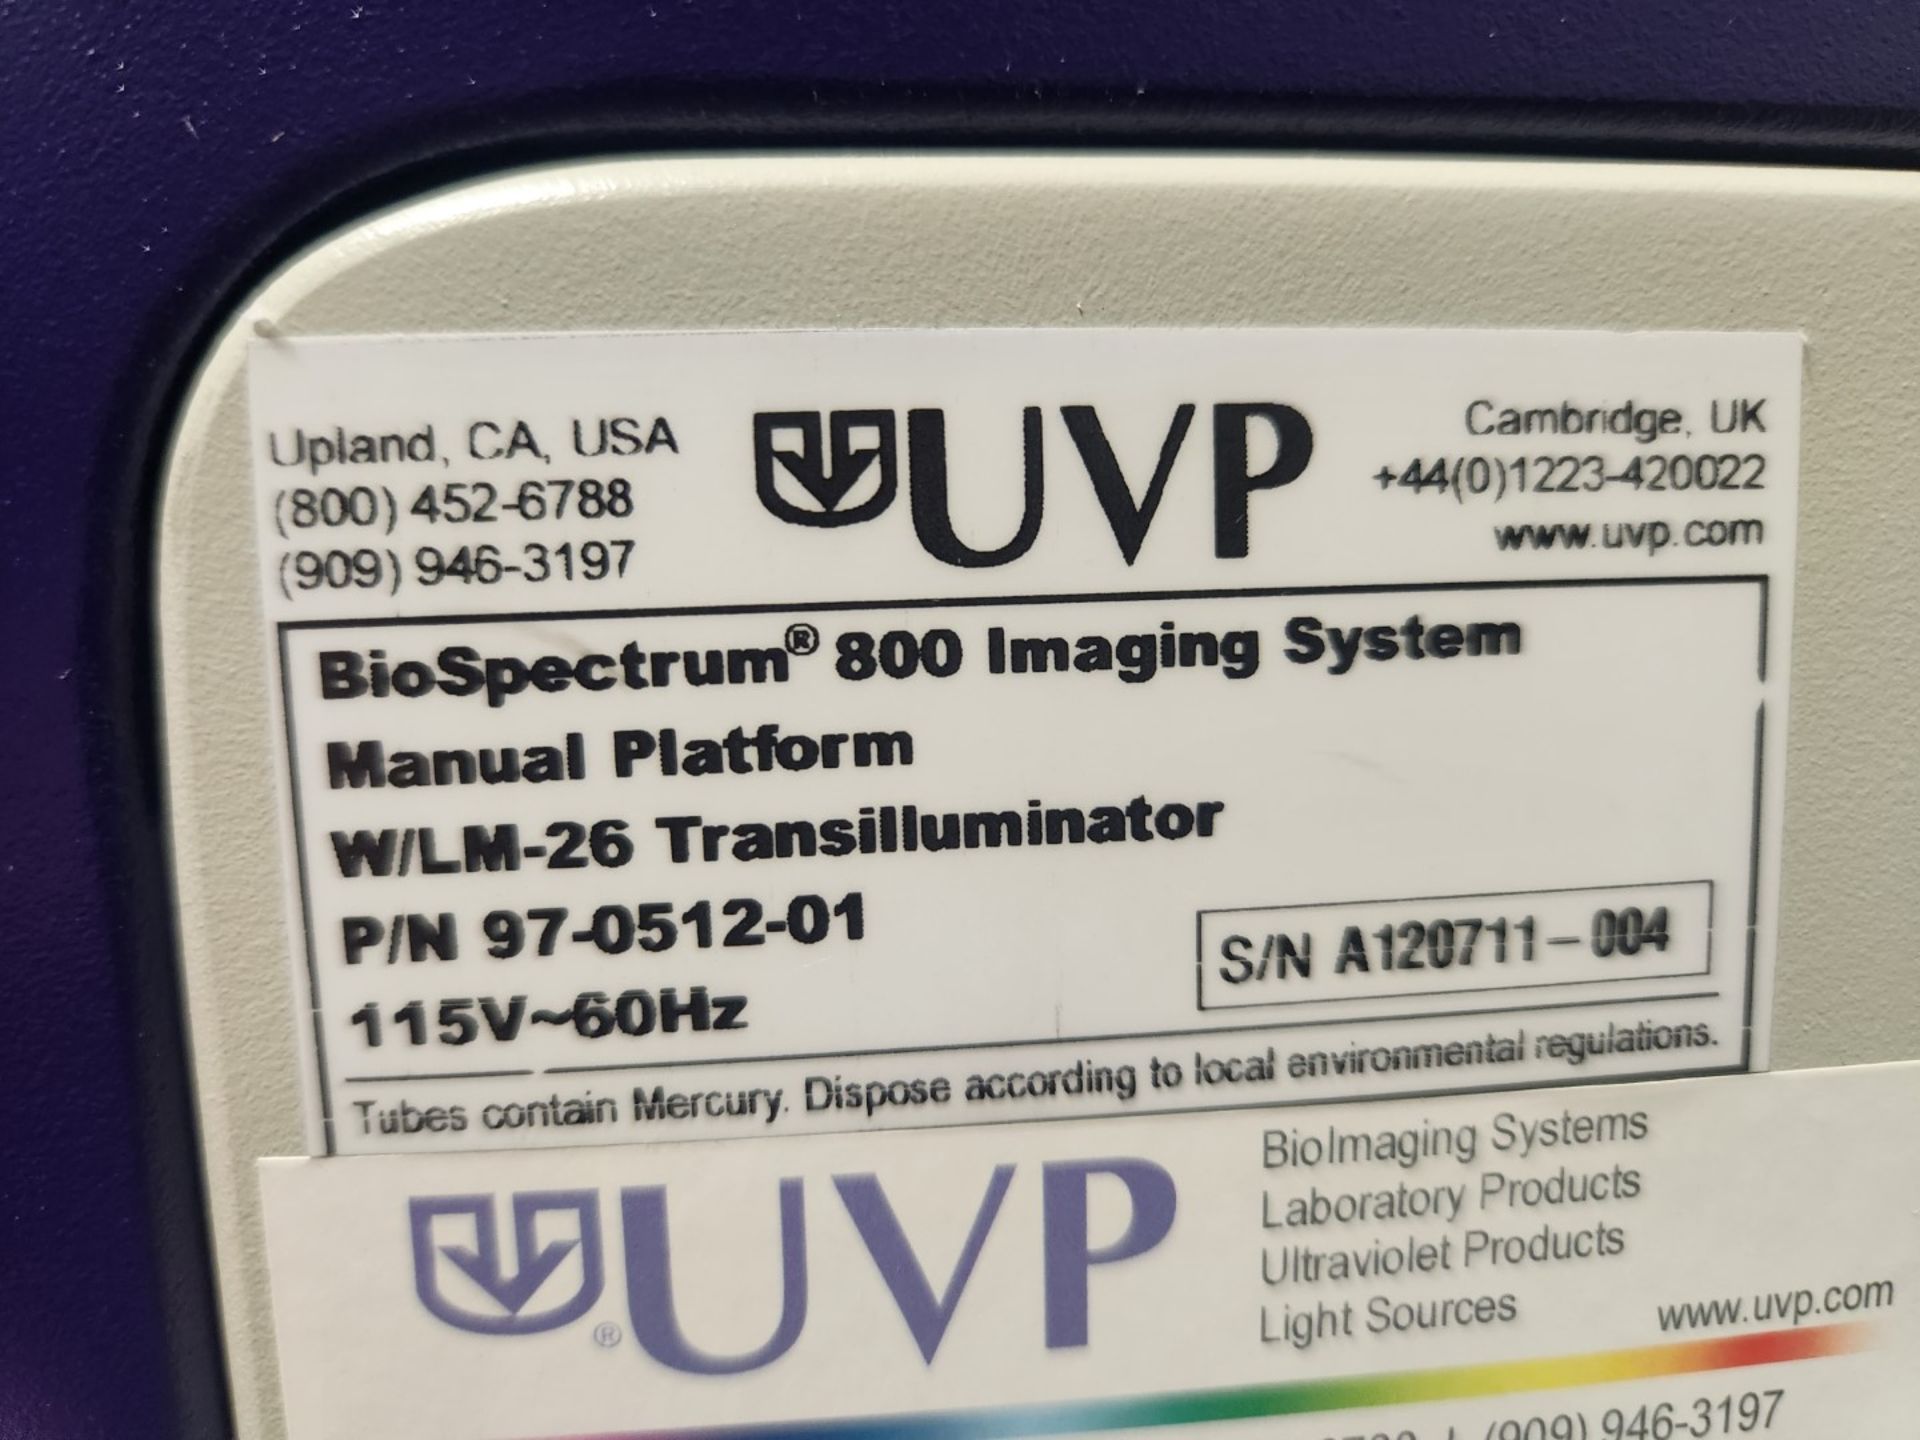 UVP Biospectrum Multispectral imaging system, model 800, with camera and transilluminator, with - Image 7 of 8